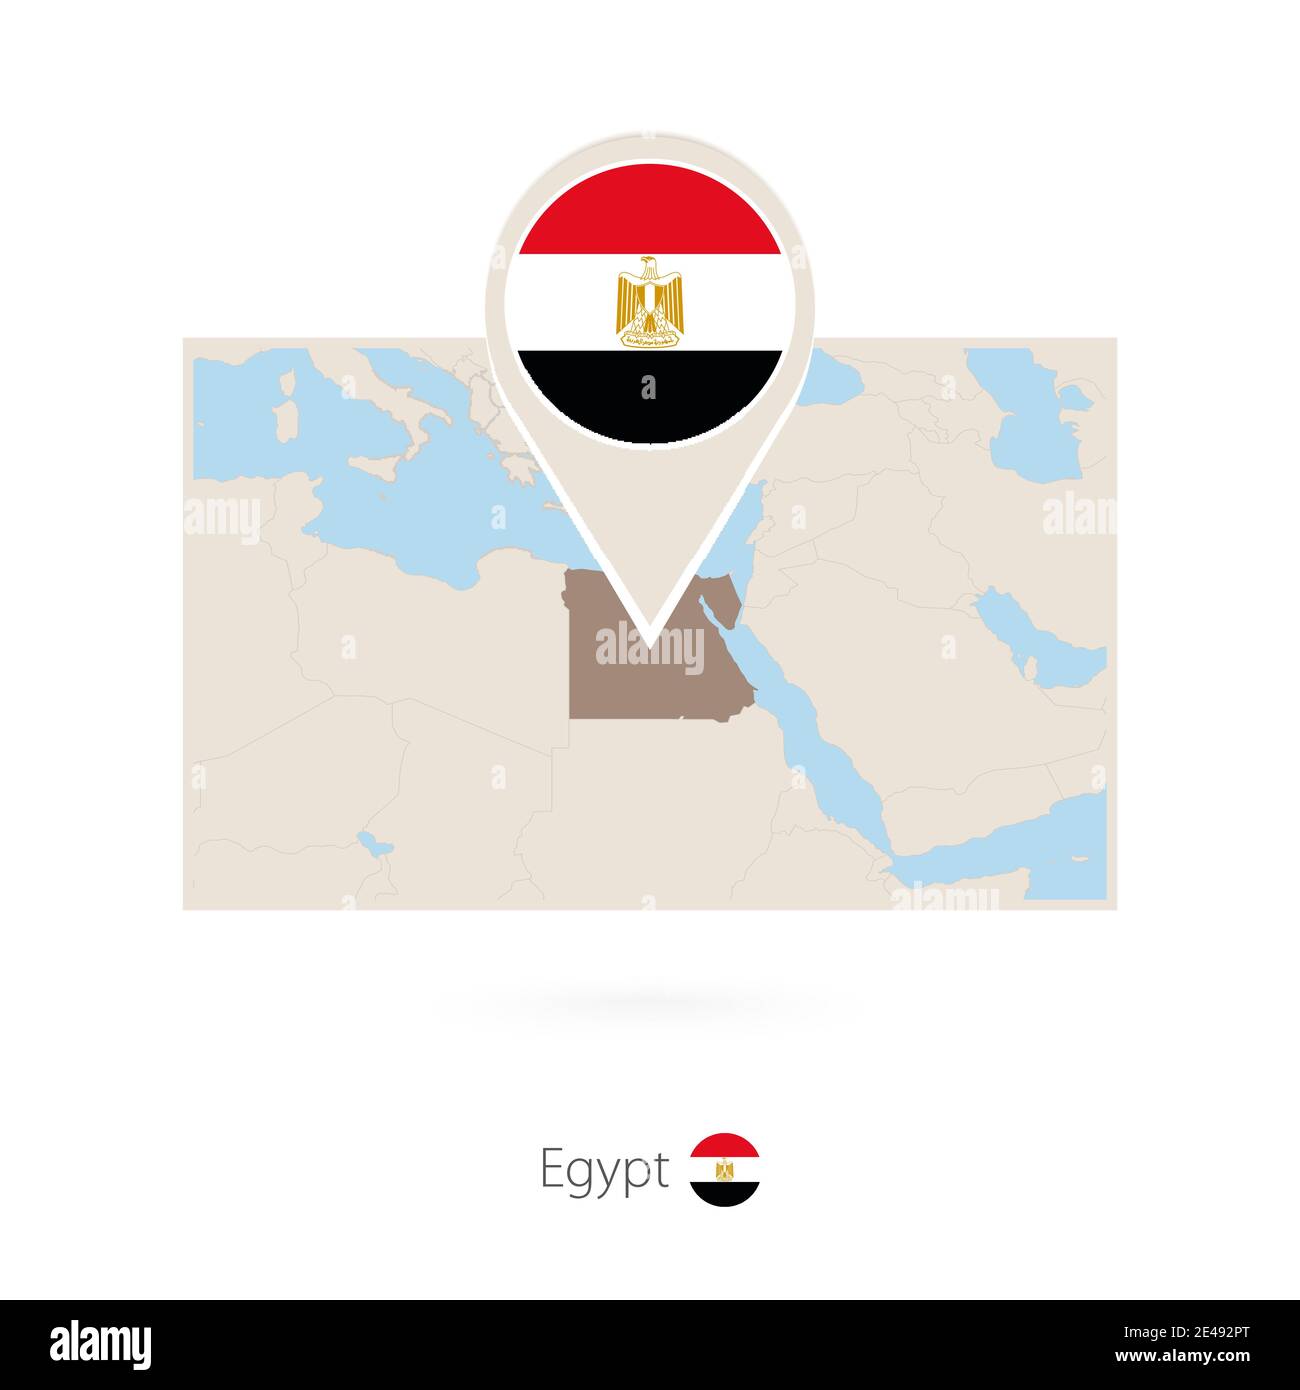 Rectangular map of Egypt with pin icon of Egypt Stock Vector